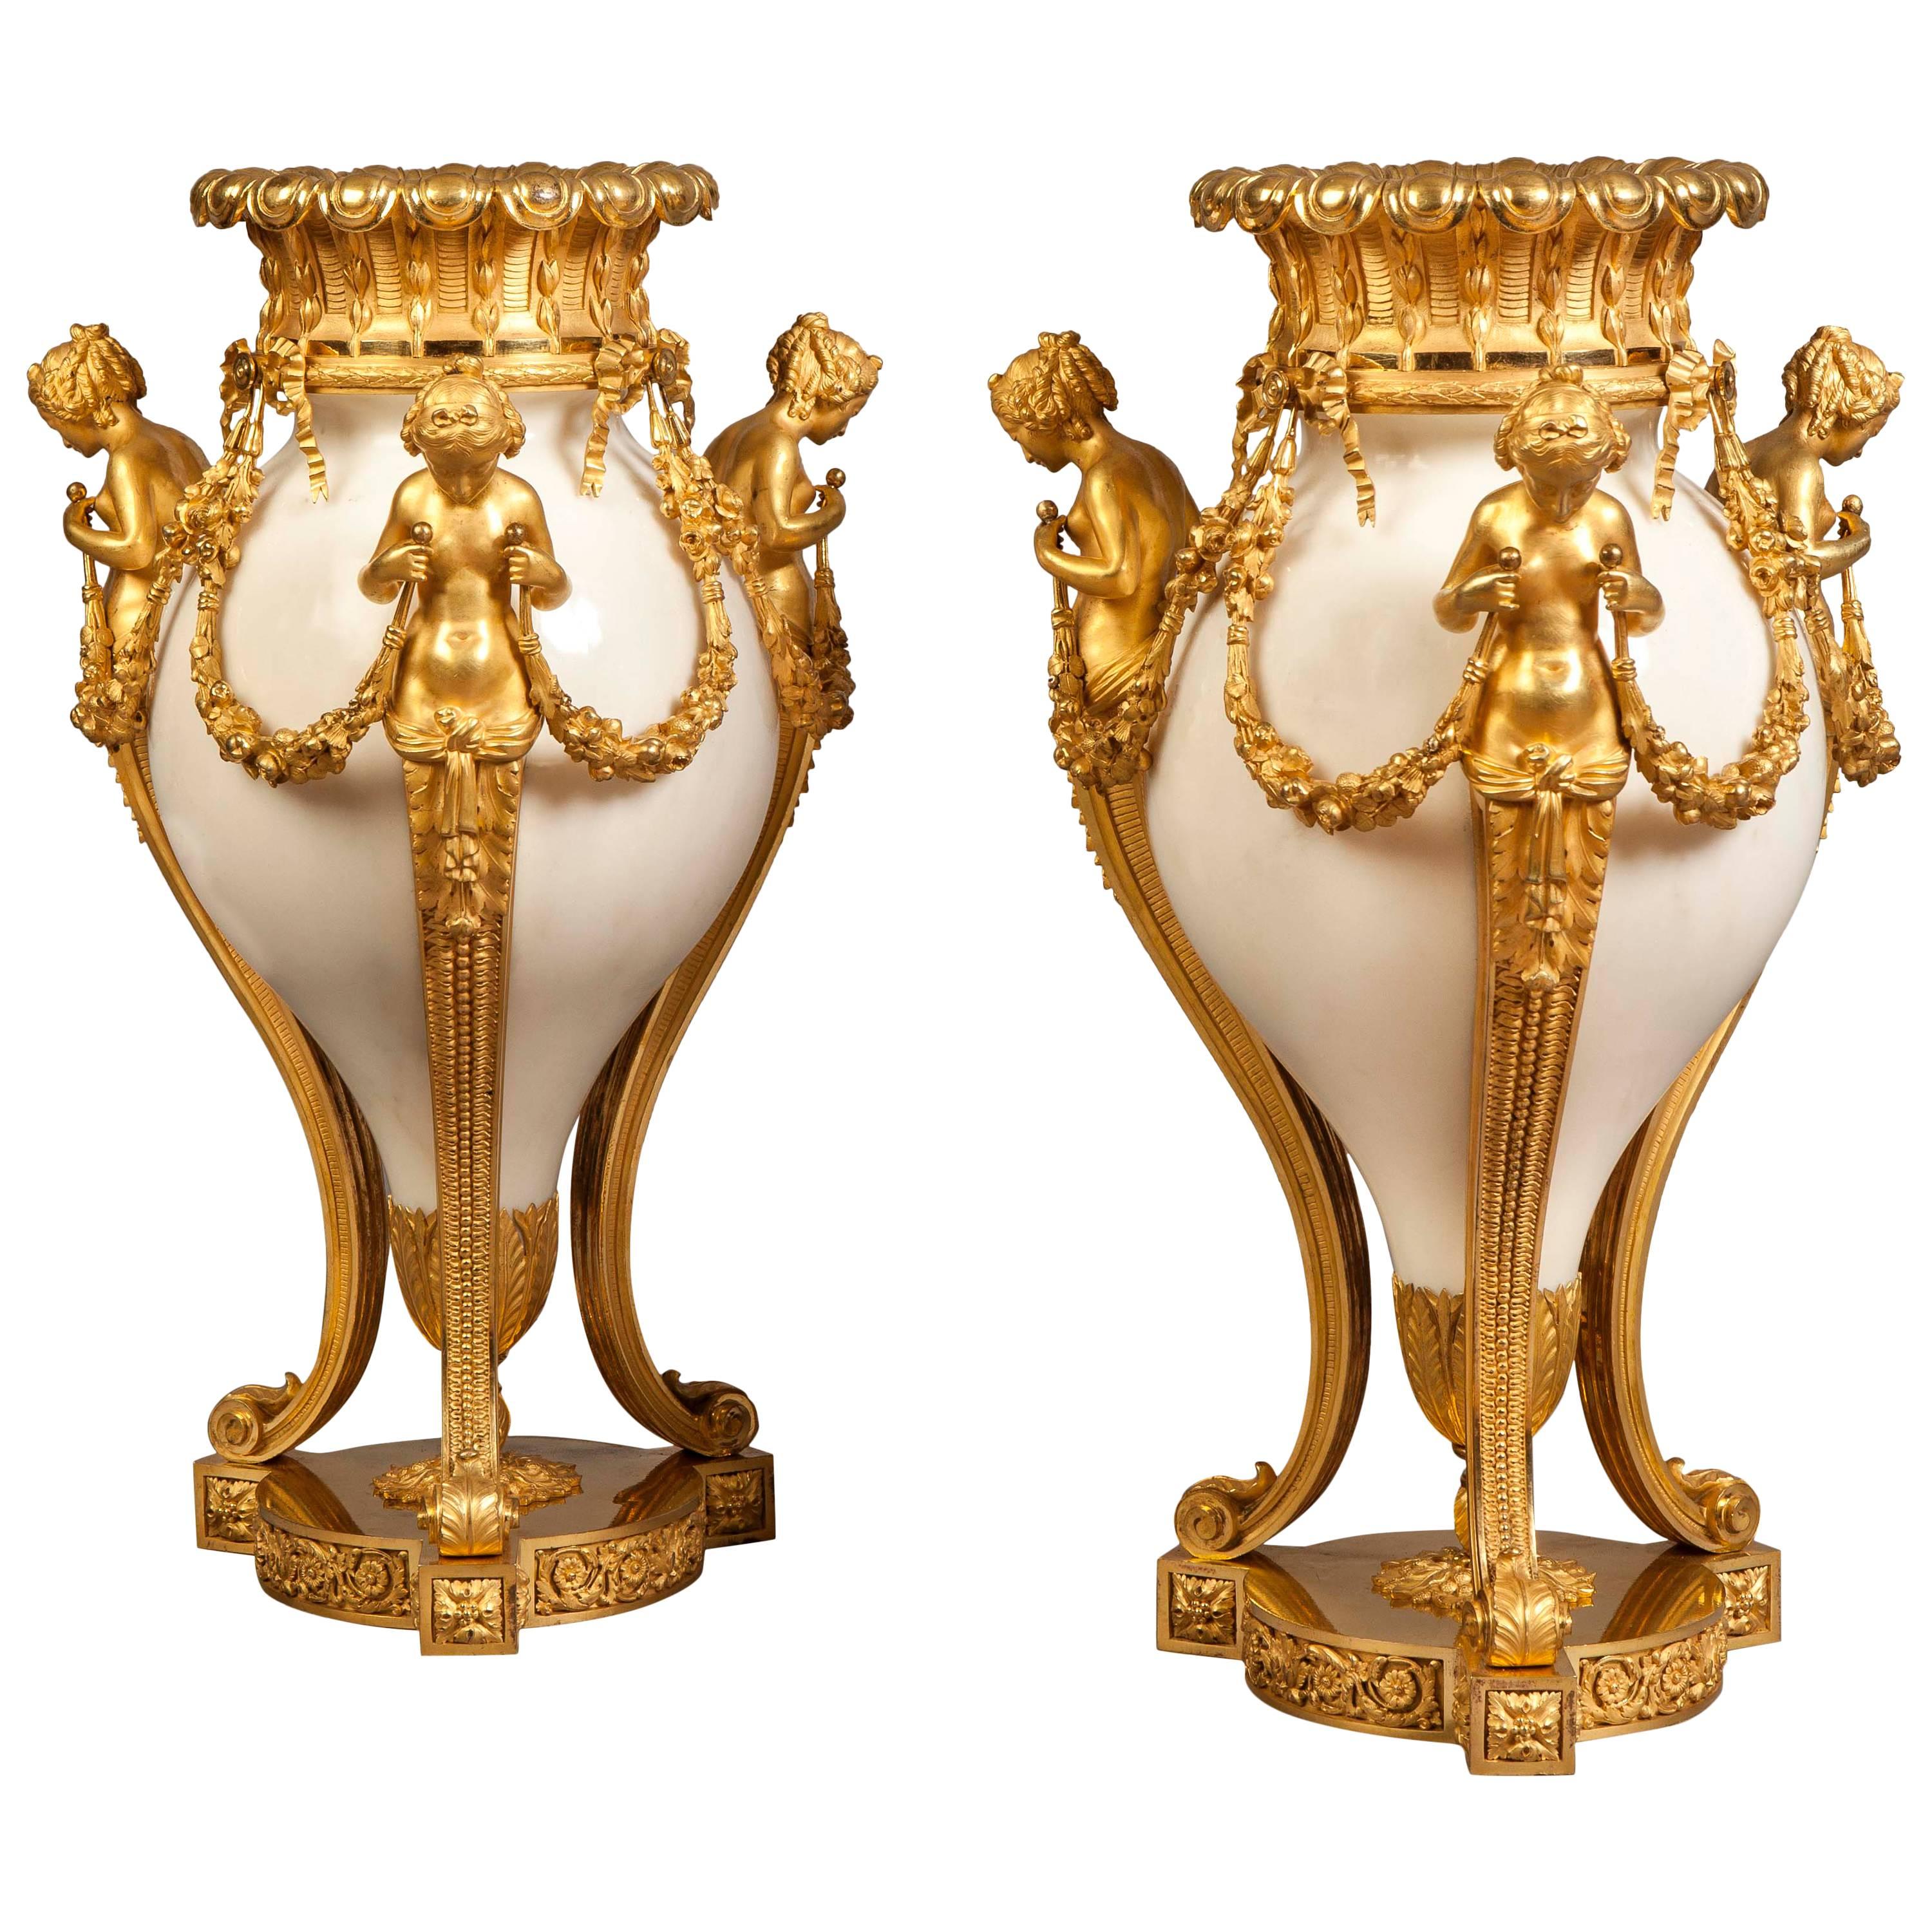 Pair of French Large Ormolu and White Marble Urns, 19th Century